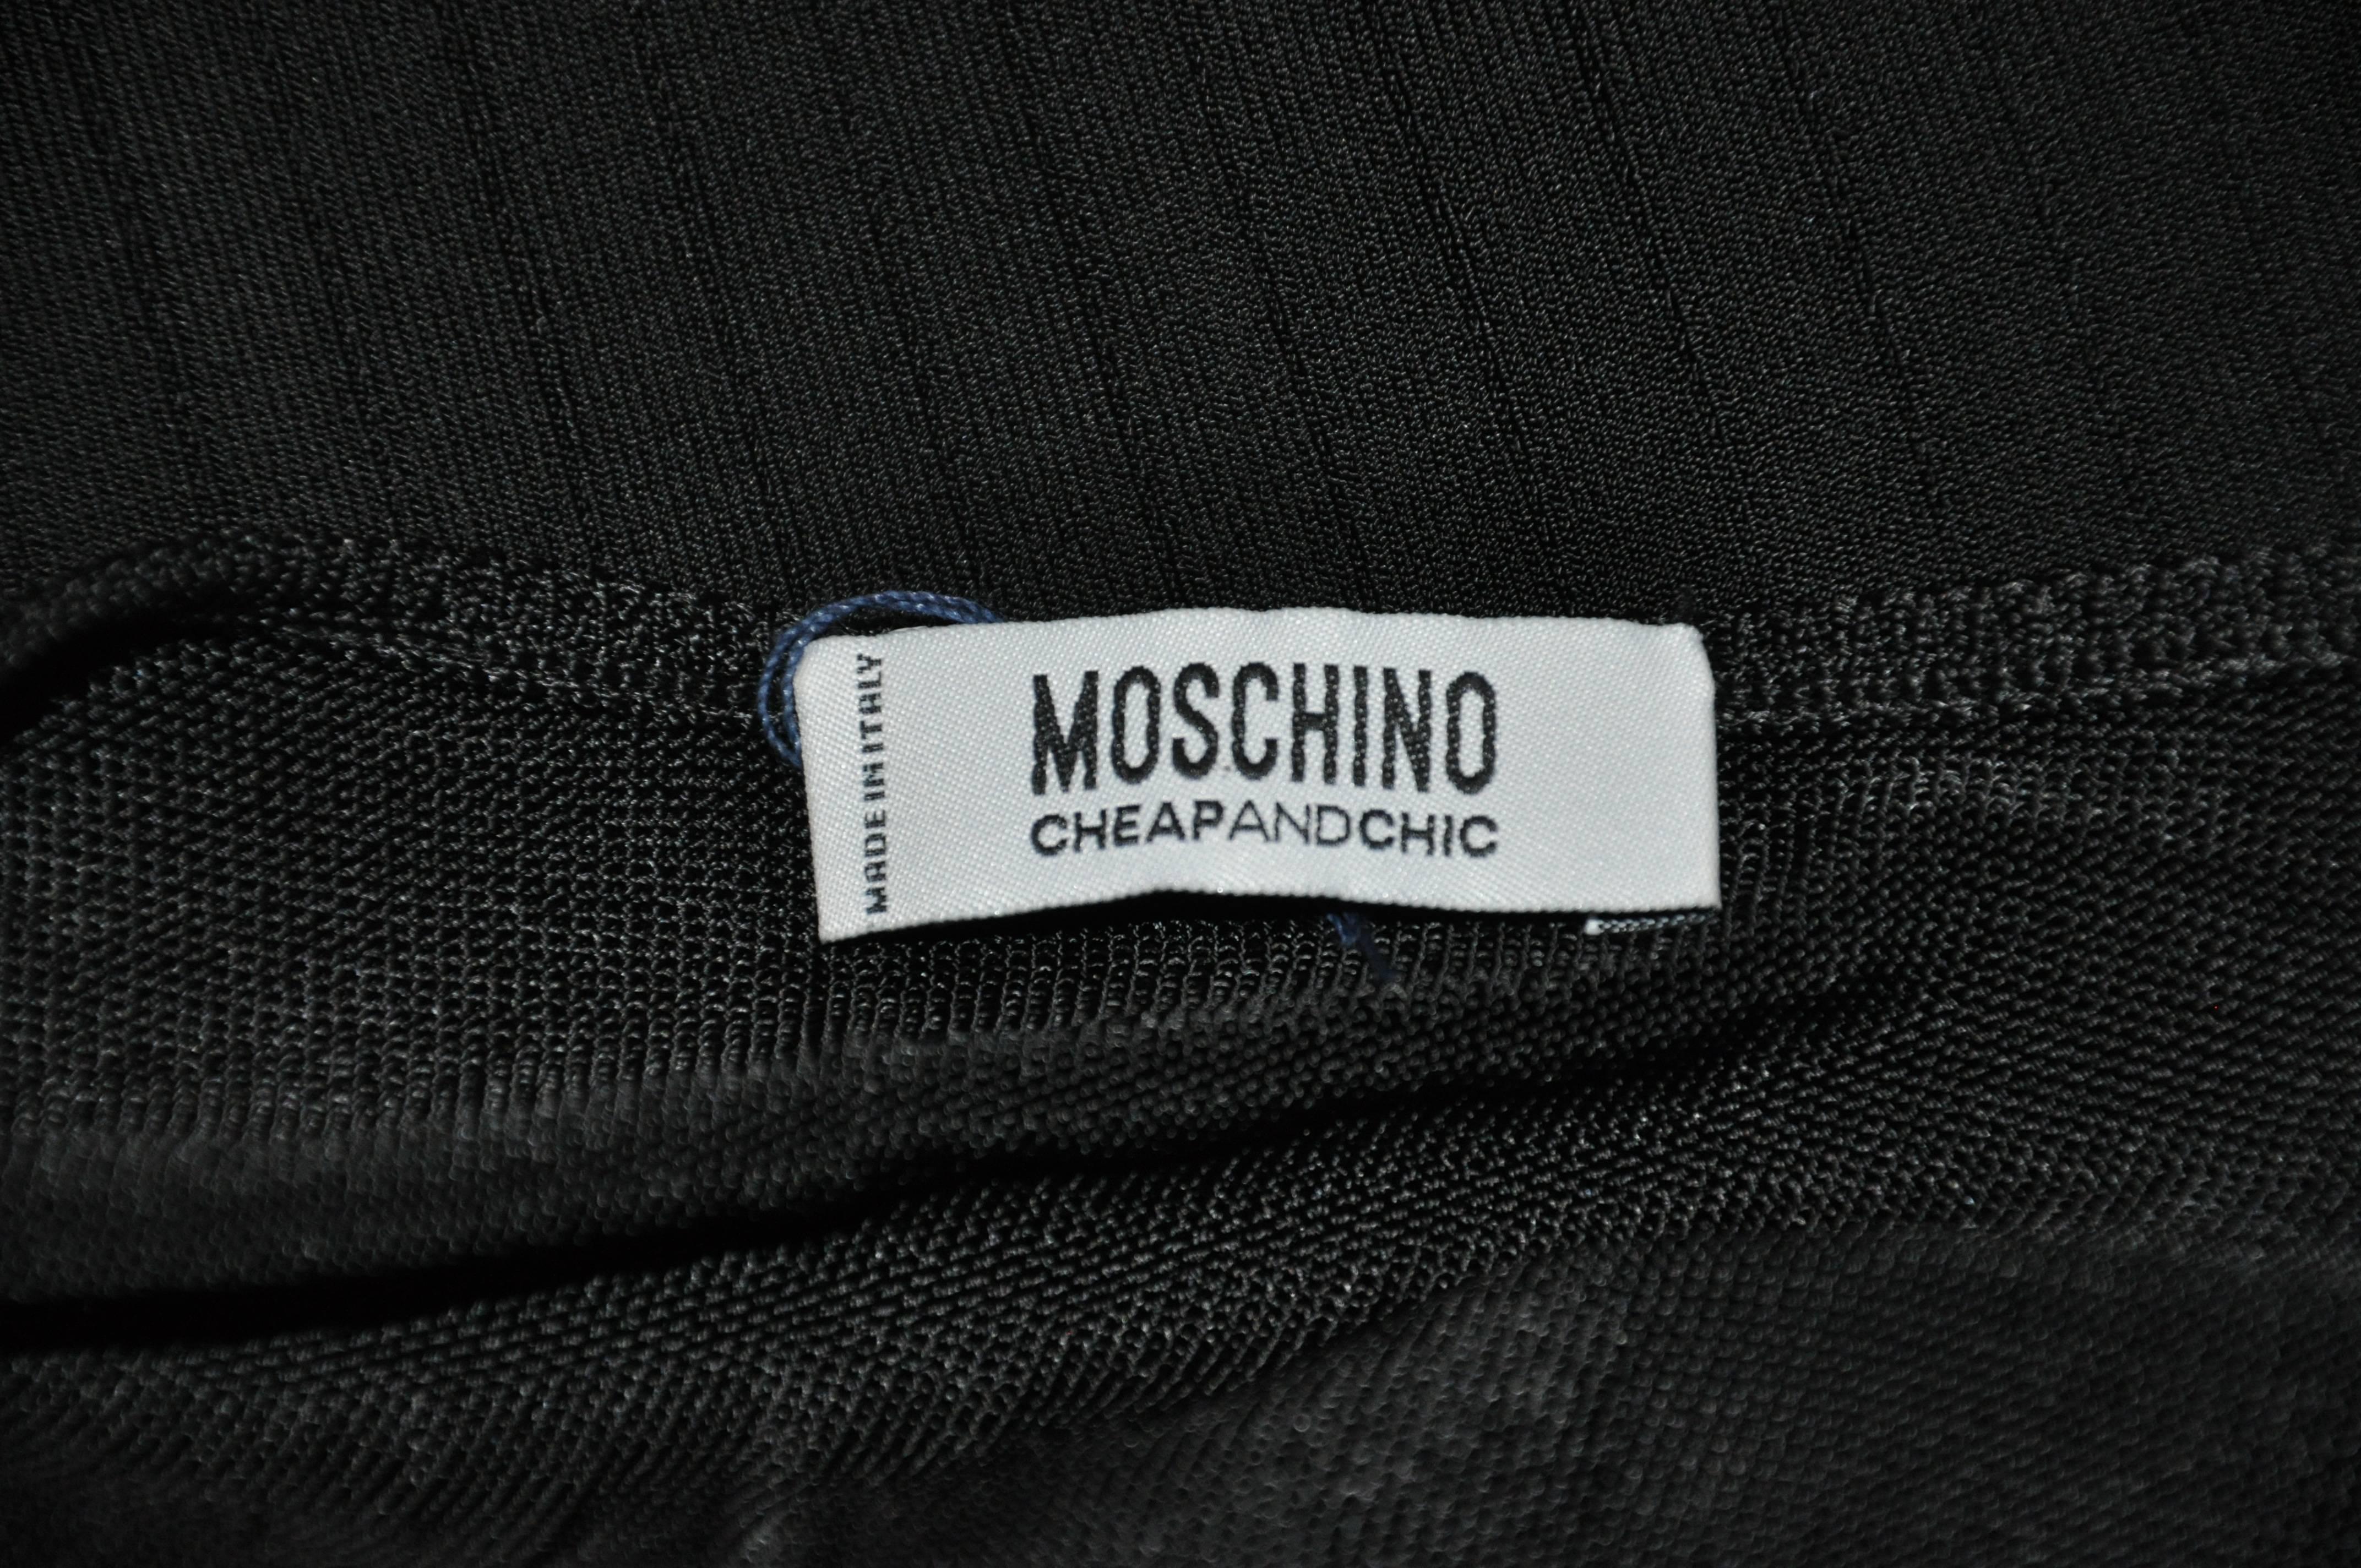         Moschino wonderful sexy body-hugging black stretch knit tank top is detailed with micro-lace hem-line. The length of the front measures 9 1/4